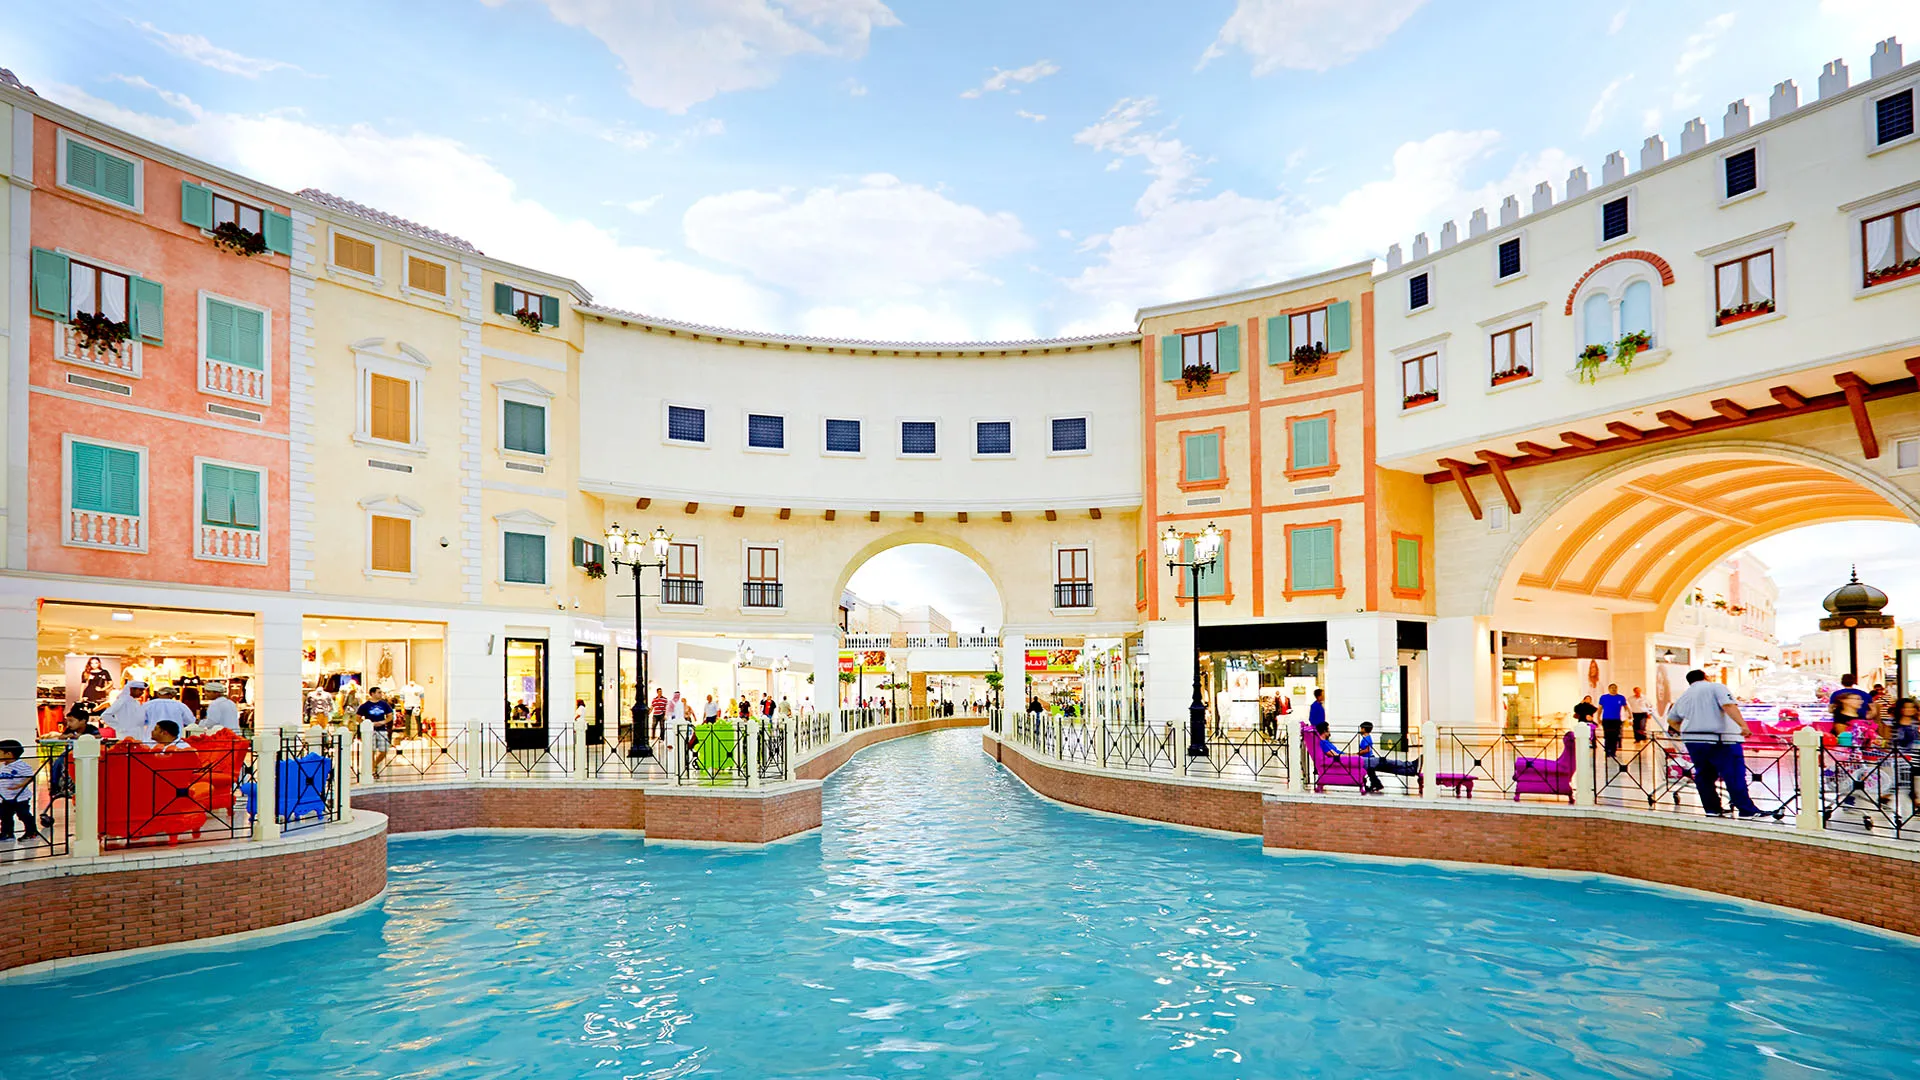 The Villaggio Mall in Qatar, middle_east | Fragrance,Handbags,Shoes,Accessories,Clothes,Watches,Swimwear - Country Helper